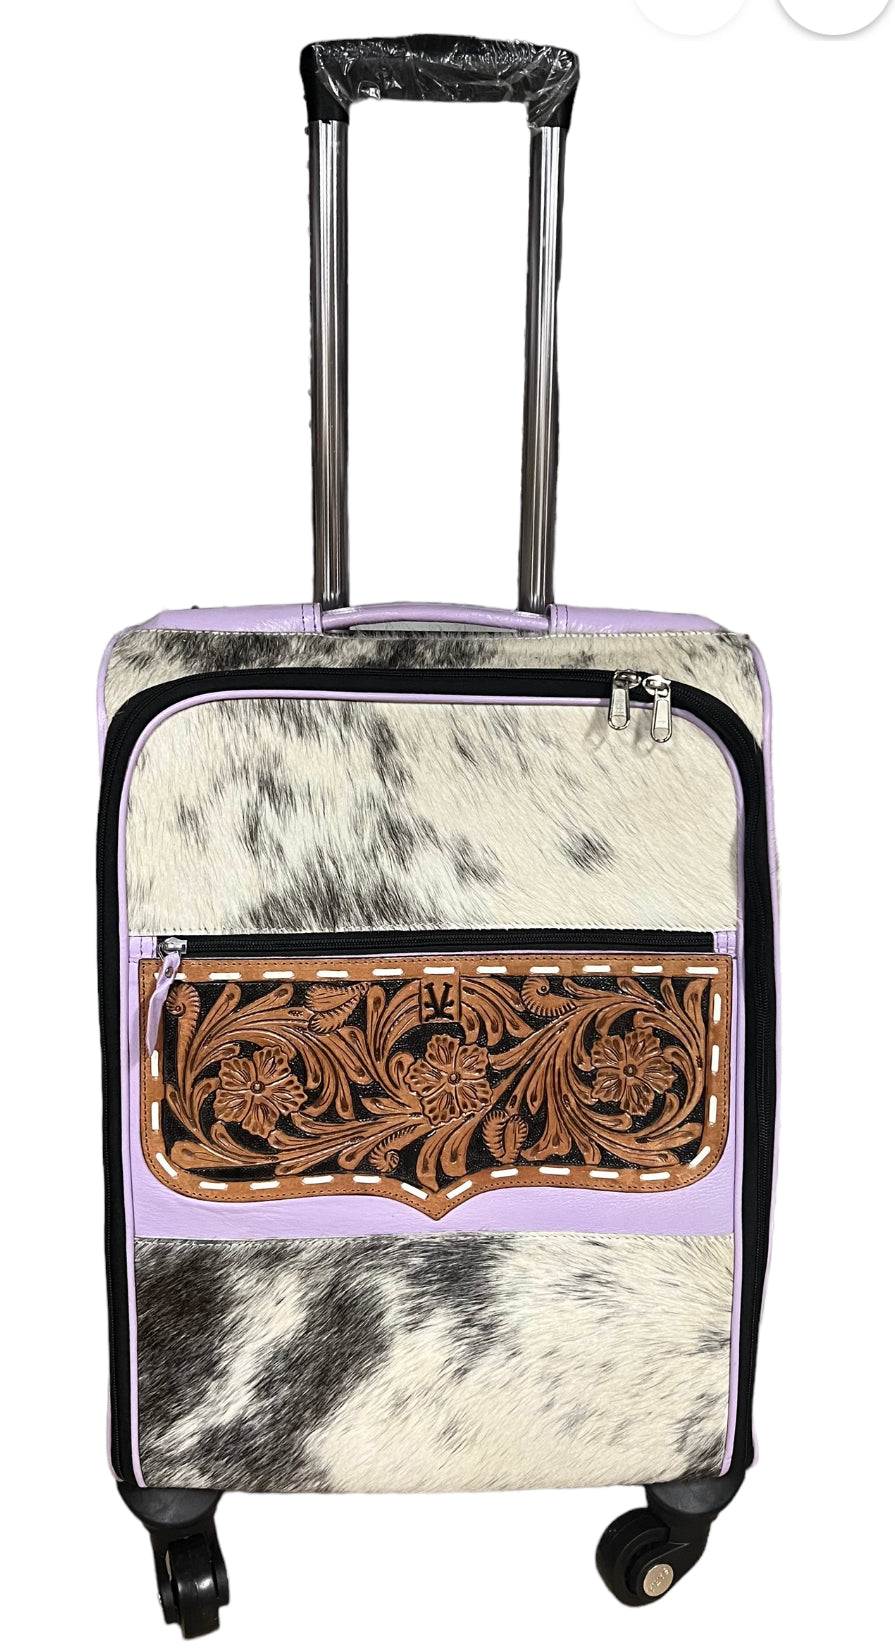 Lavender leather blk/white hide rolling suitcase